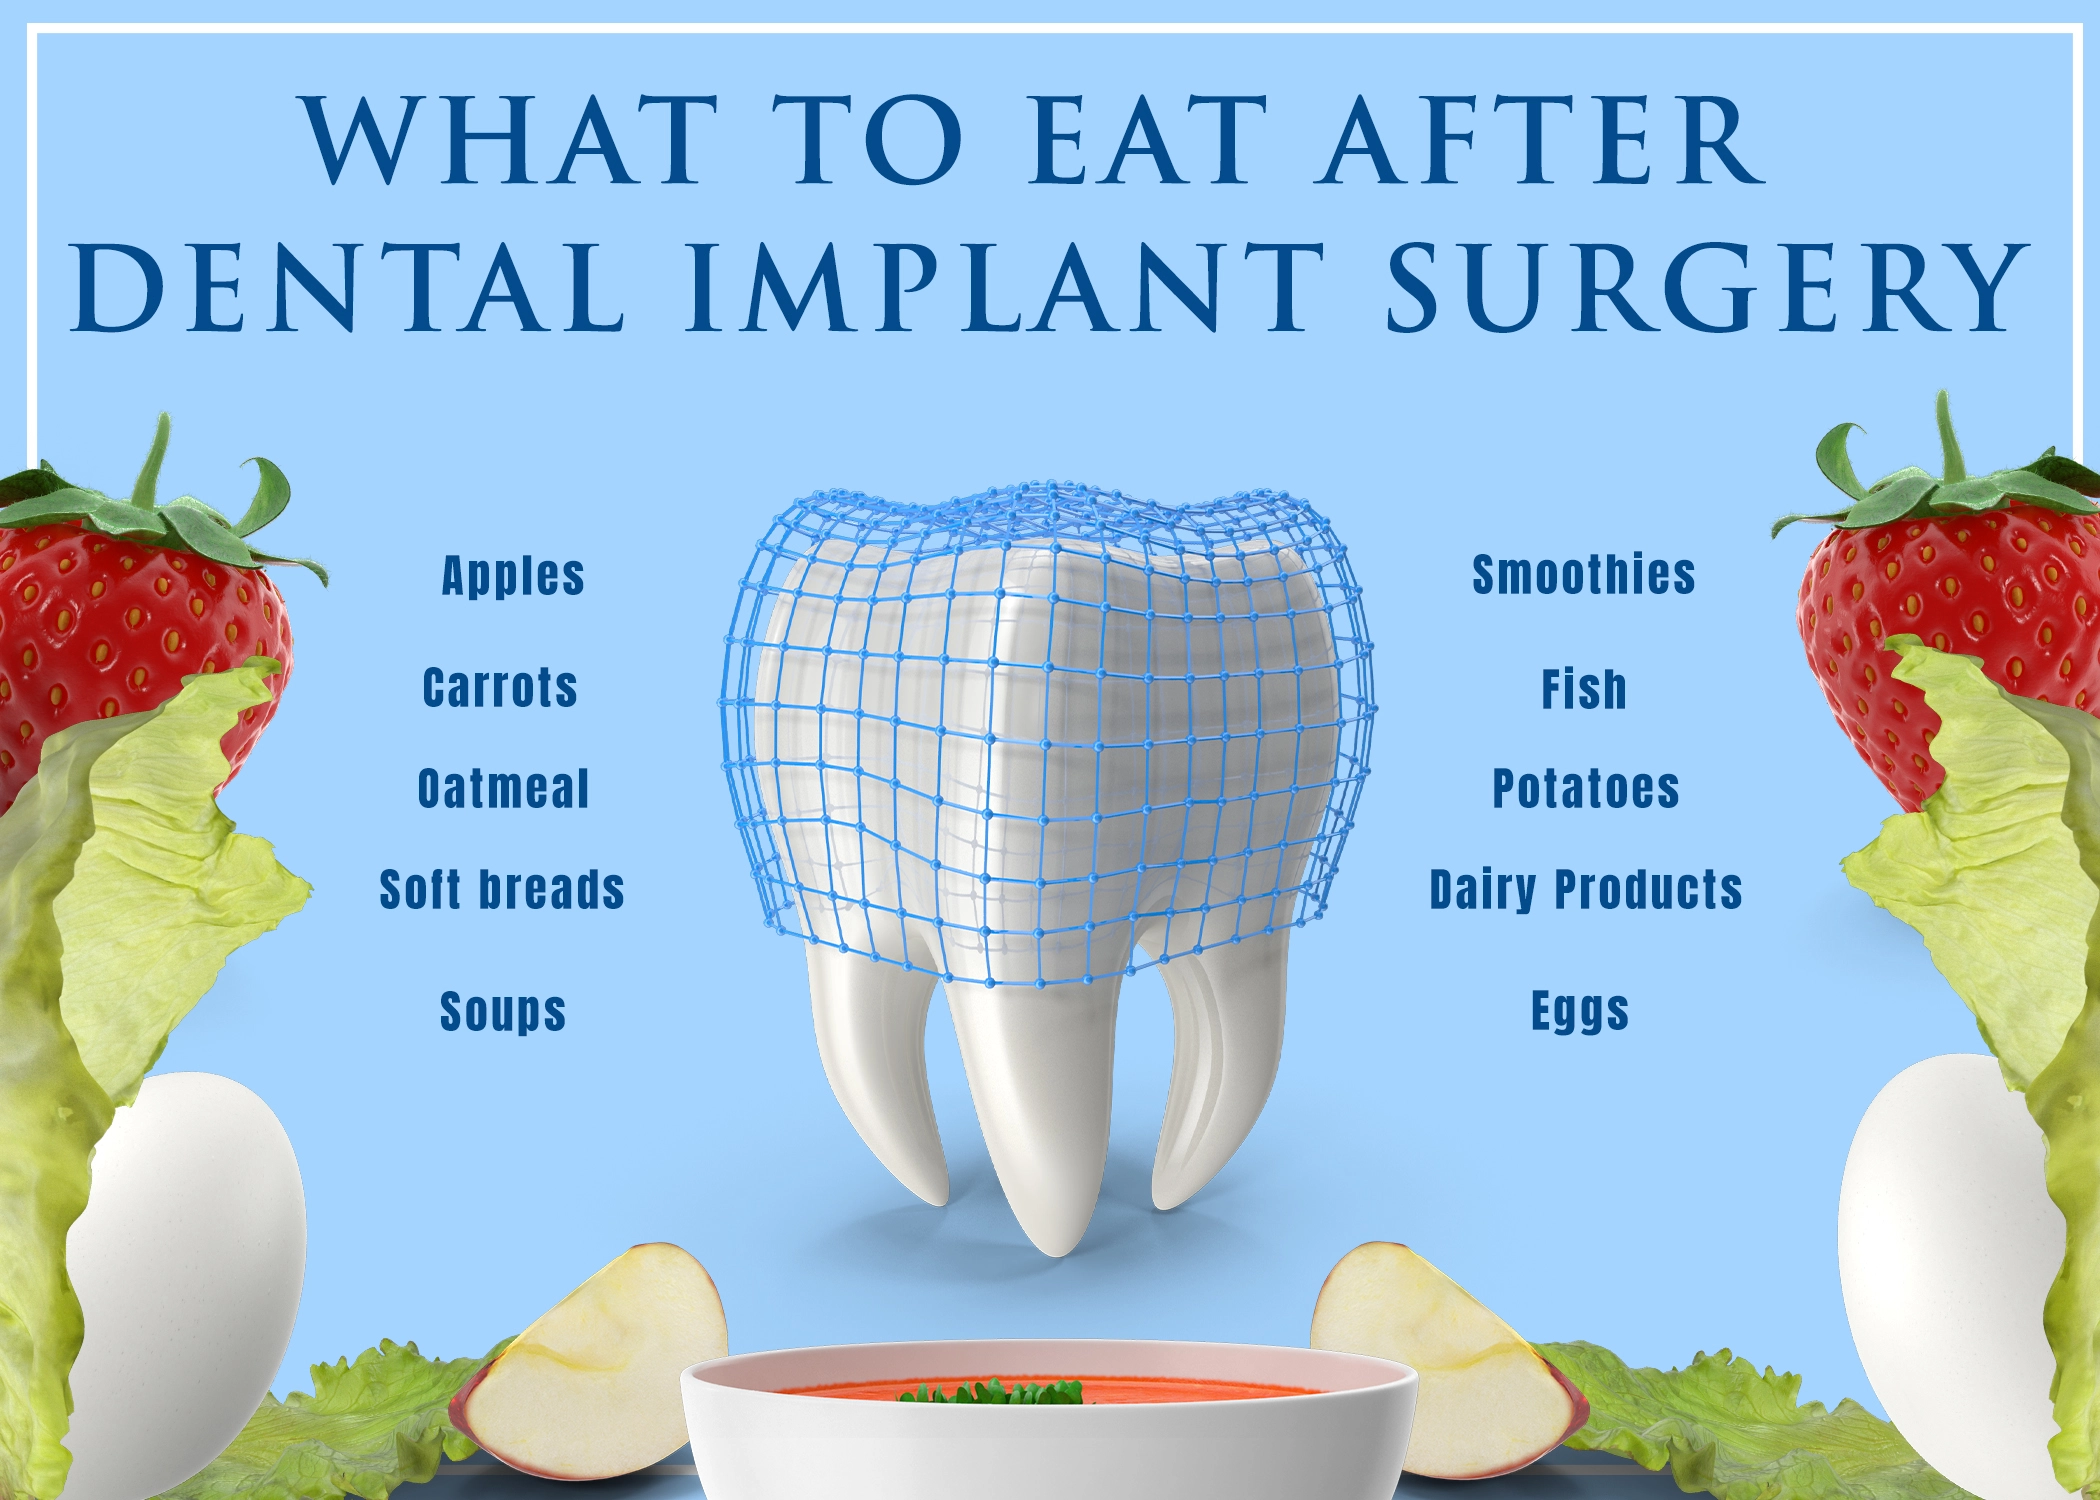 What to eat or avoid after dental implant surgery